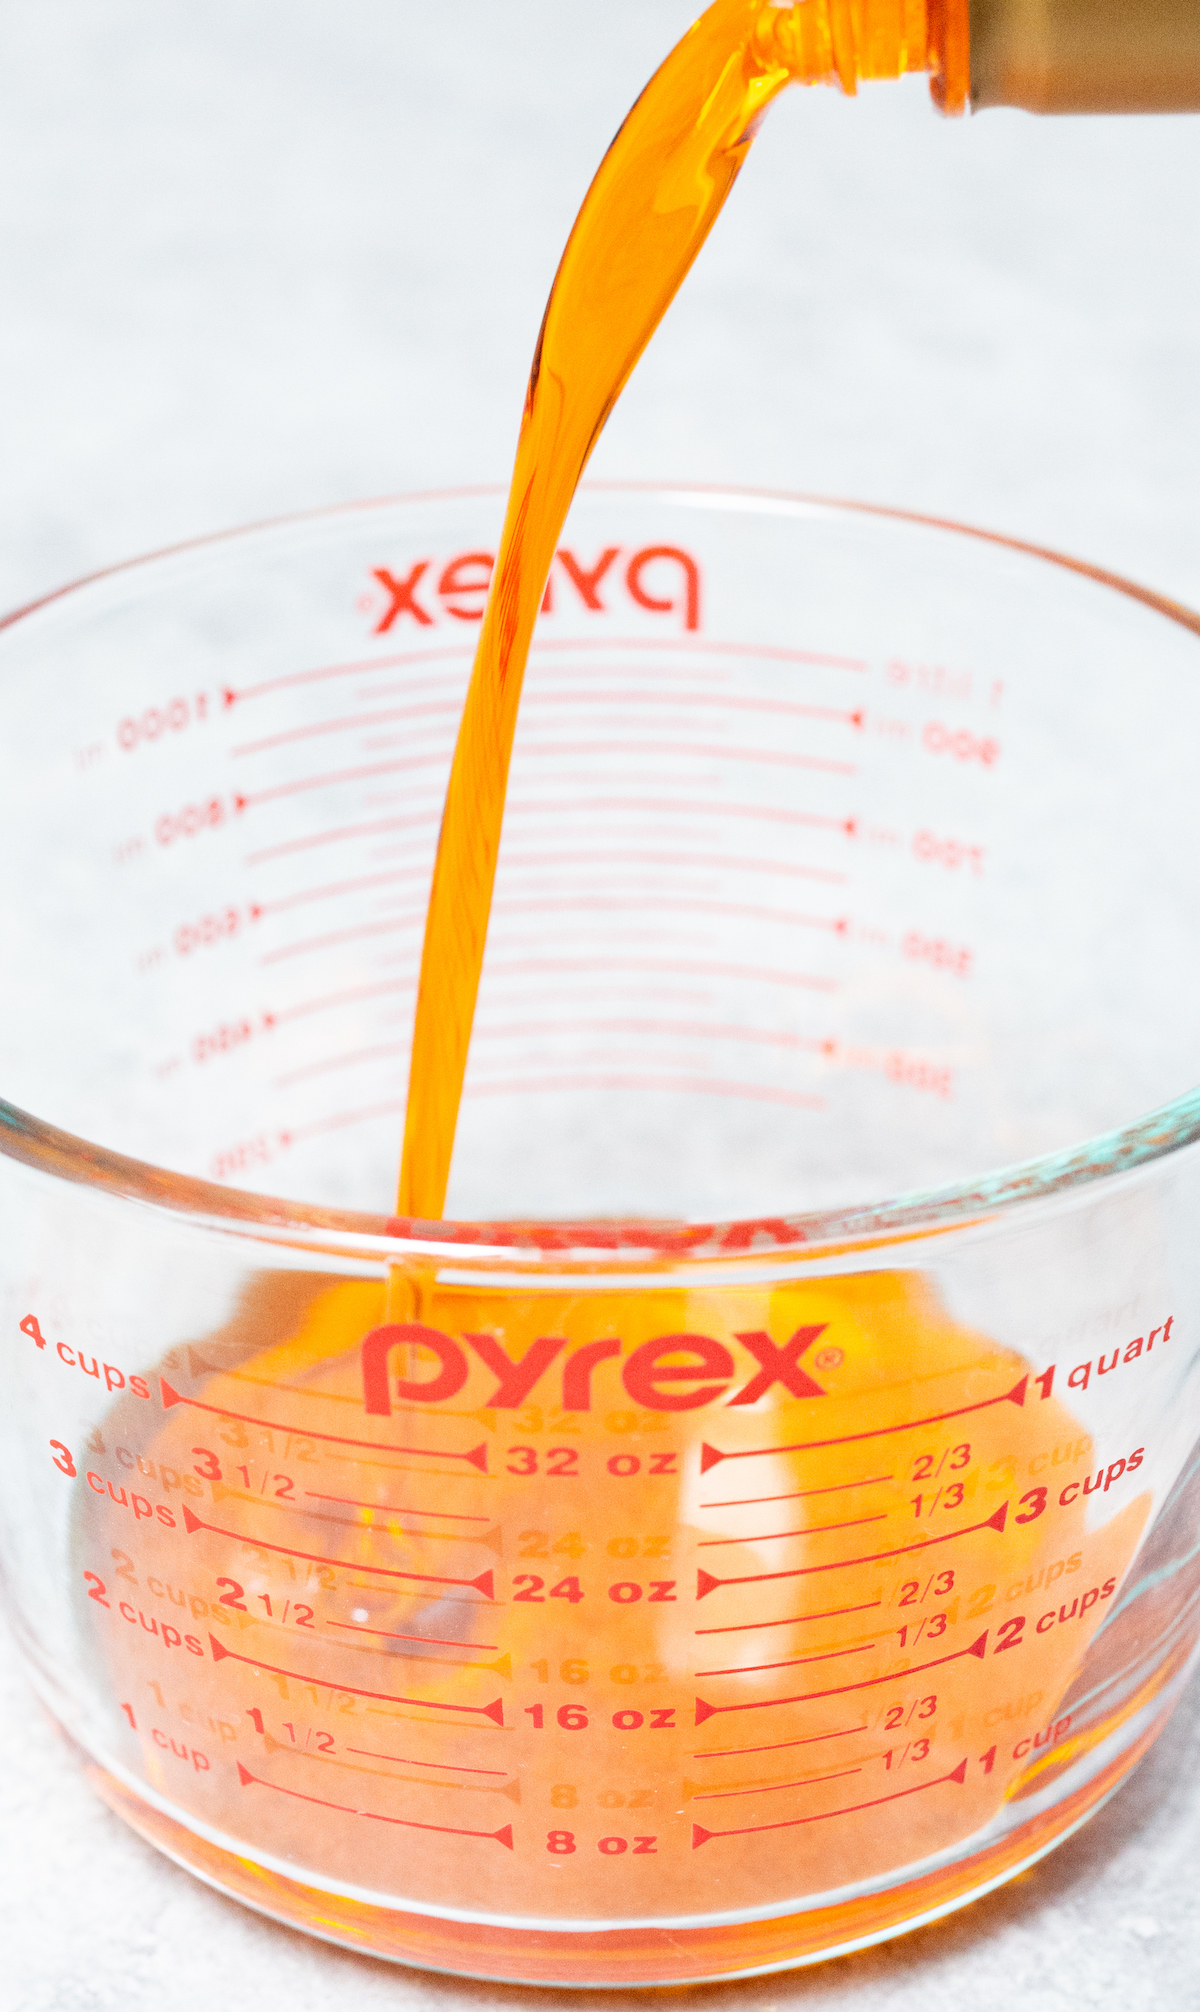 Orange syrup being poured into a large glass pyrex measuring cup.